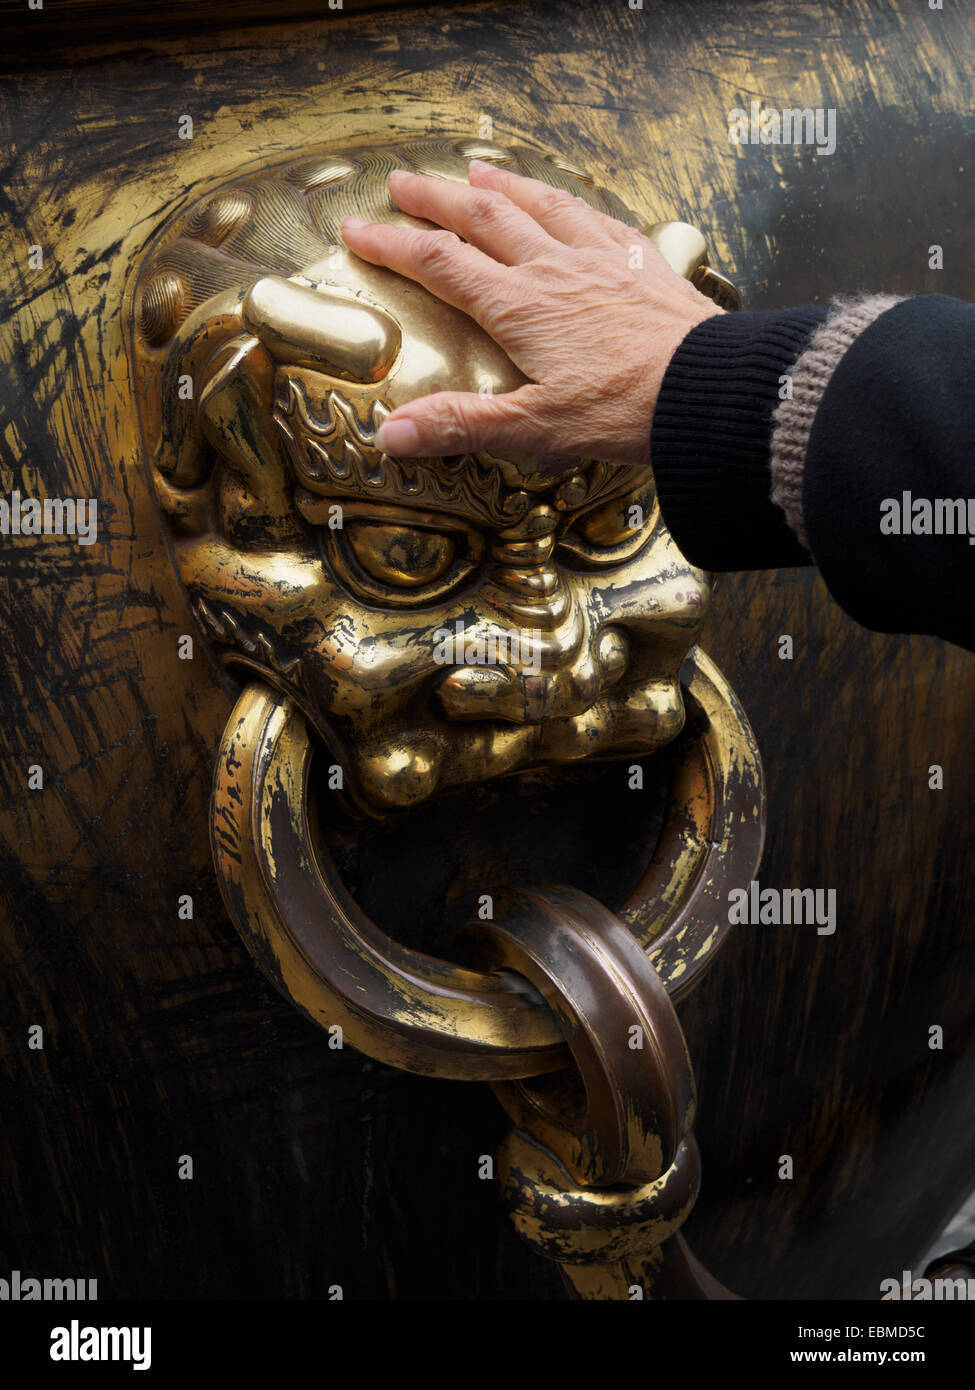 Hand rubbing a lion head on a giant cauldron inside the Forbidden City for good luck, Beijing, China Stock Photo